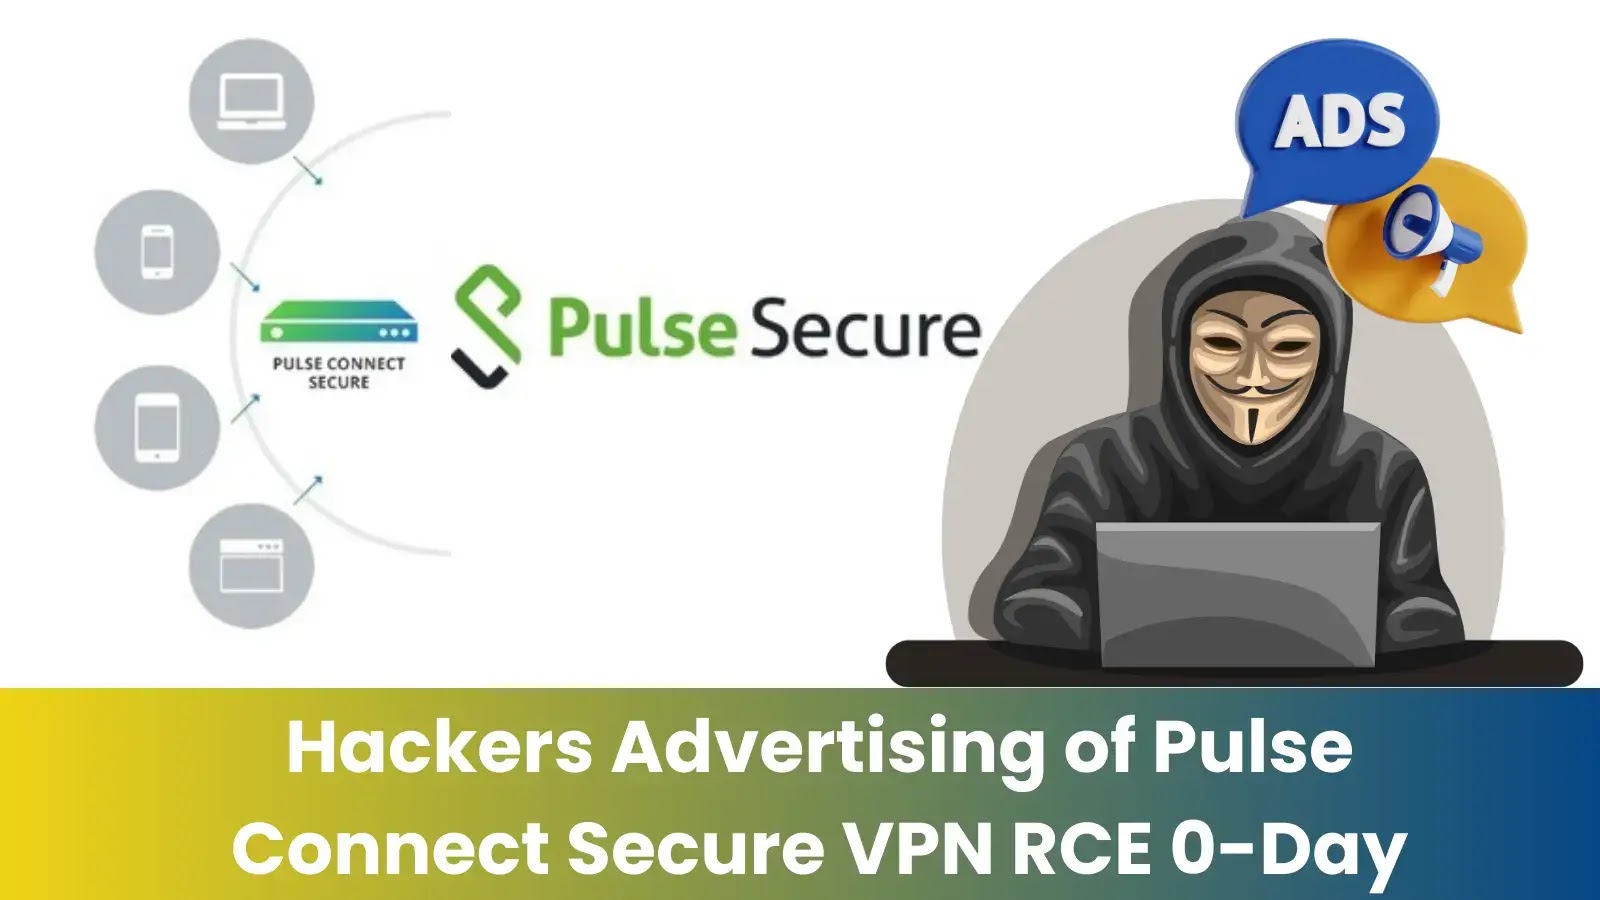 Hackers Advertising Pulse Connect Secure VPN RCE 0-Day